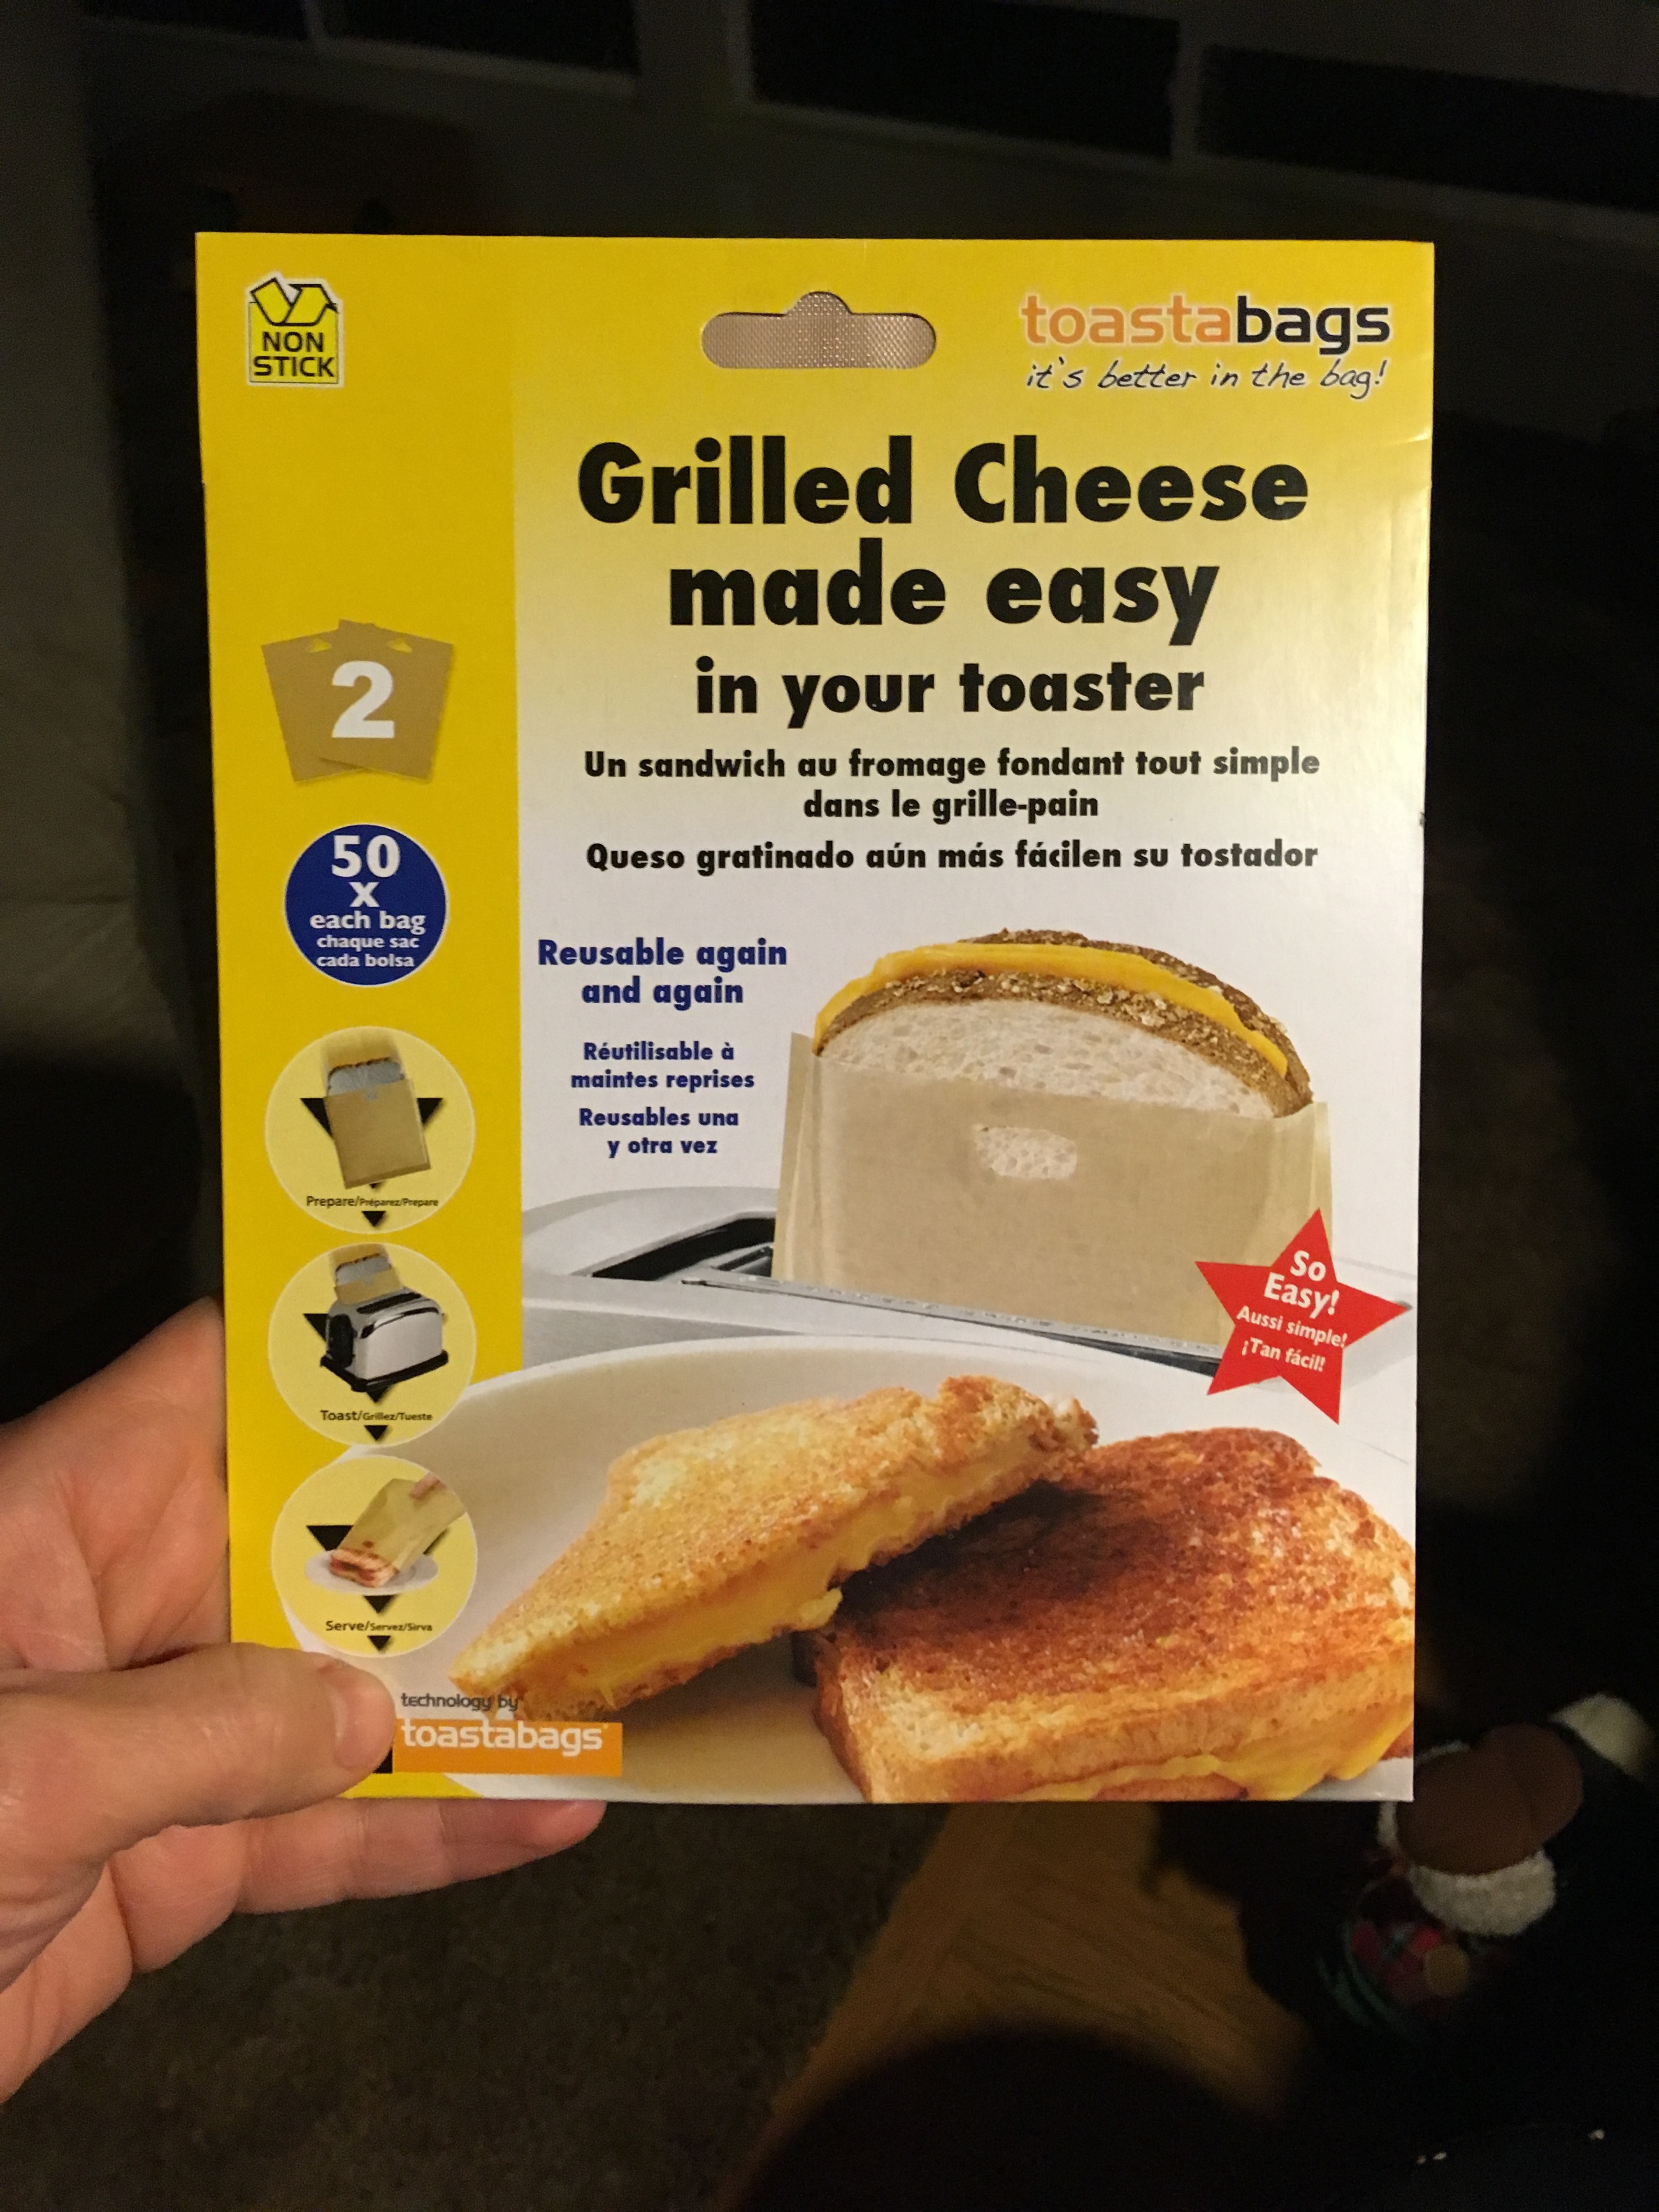 Say cheese: Sandwich preparation product gives -- and gets -- no love